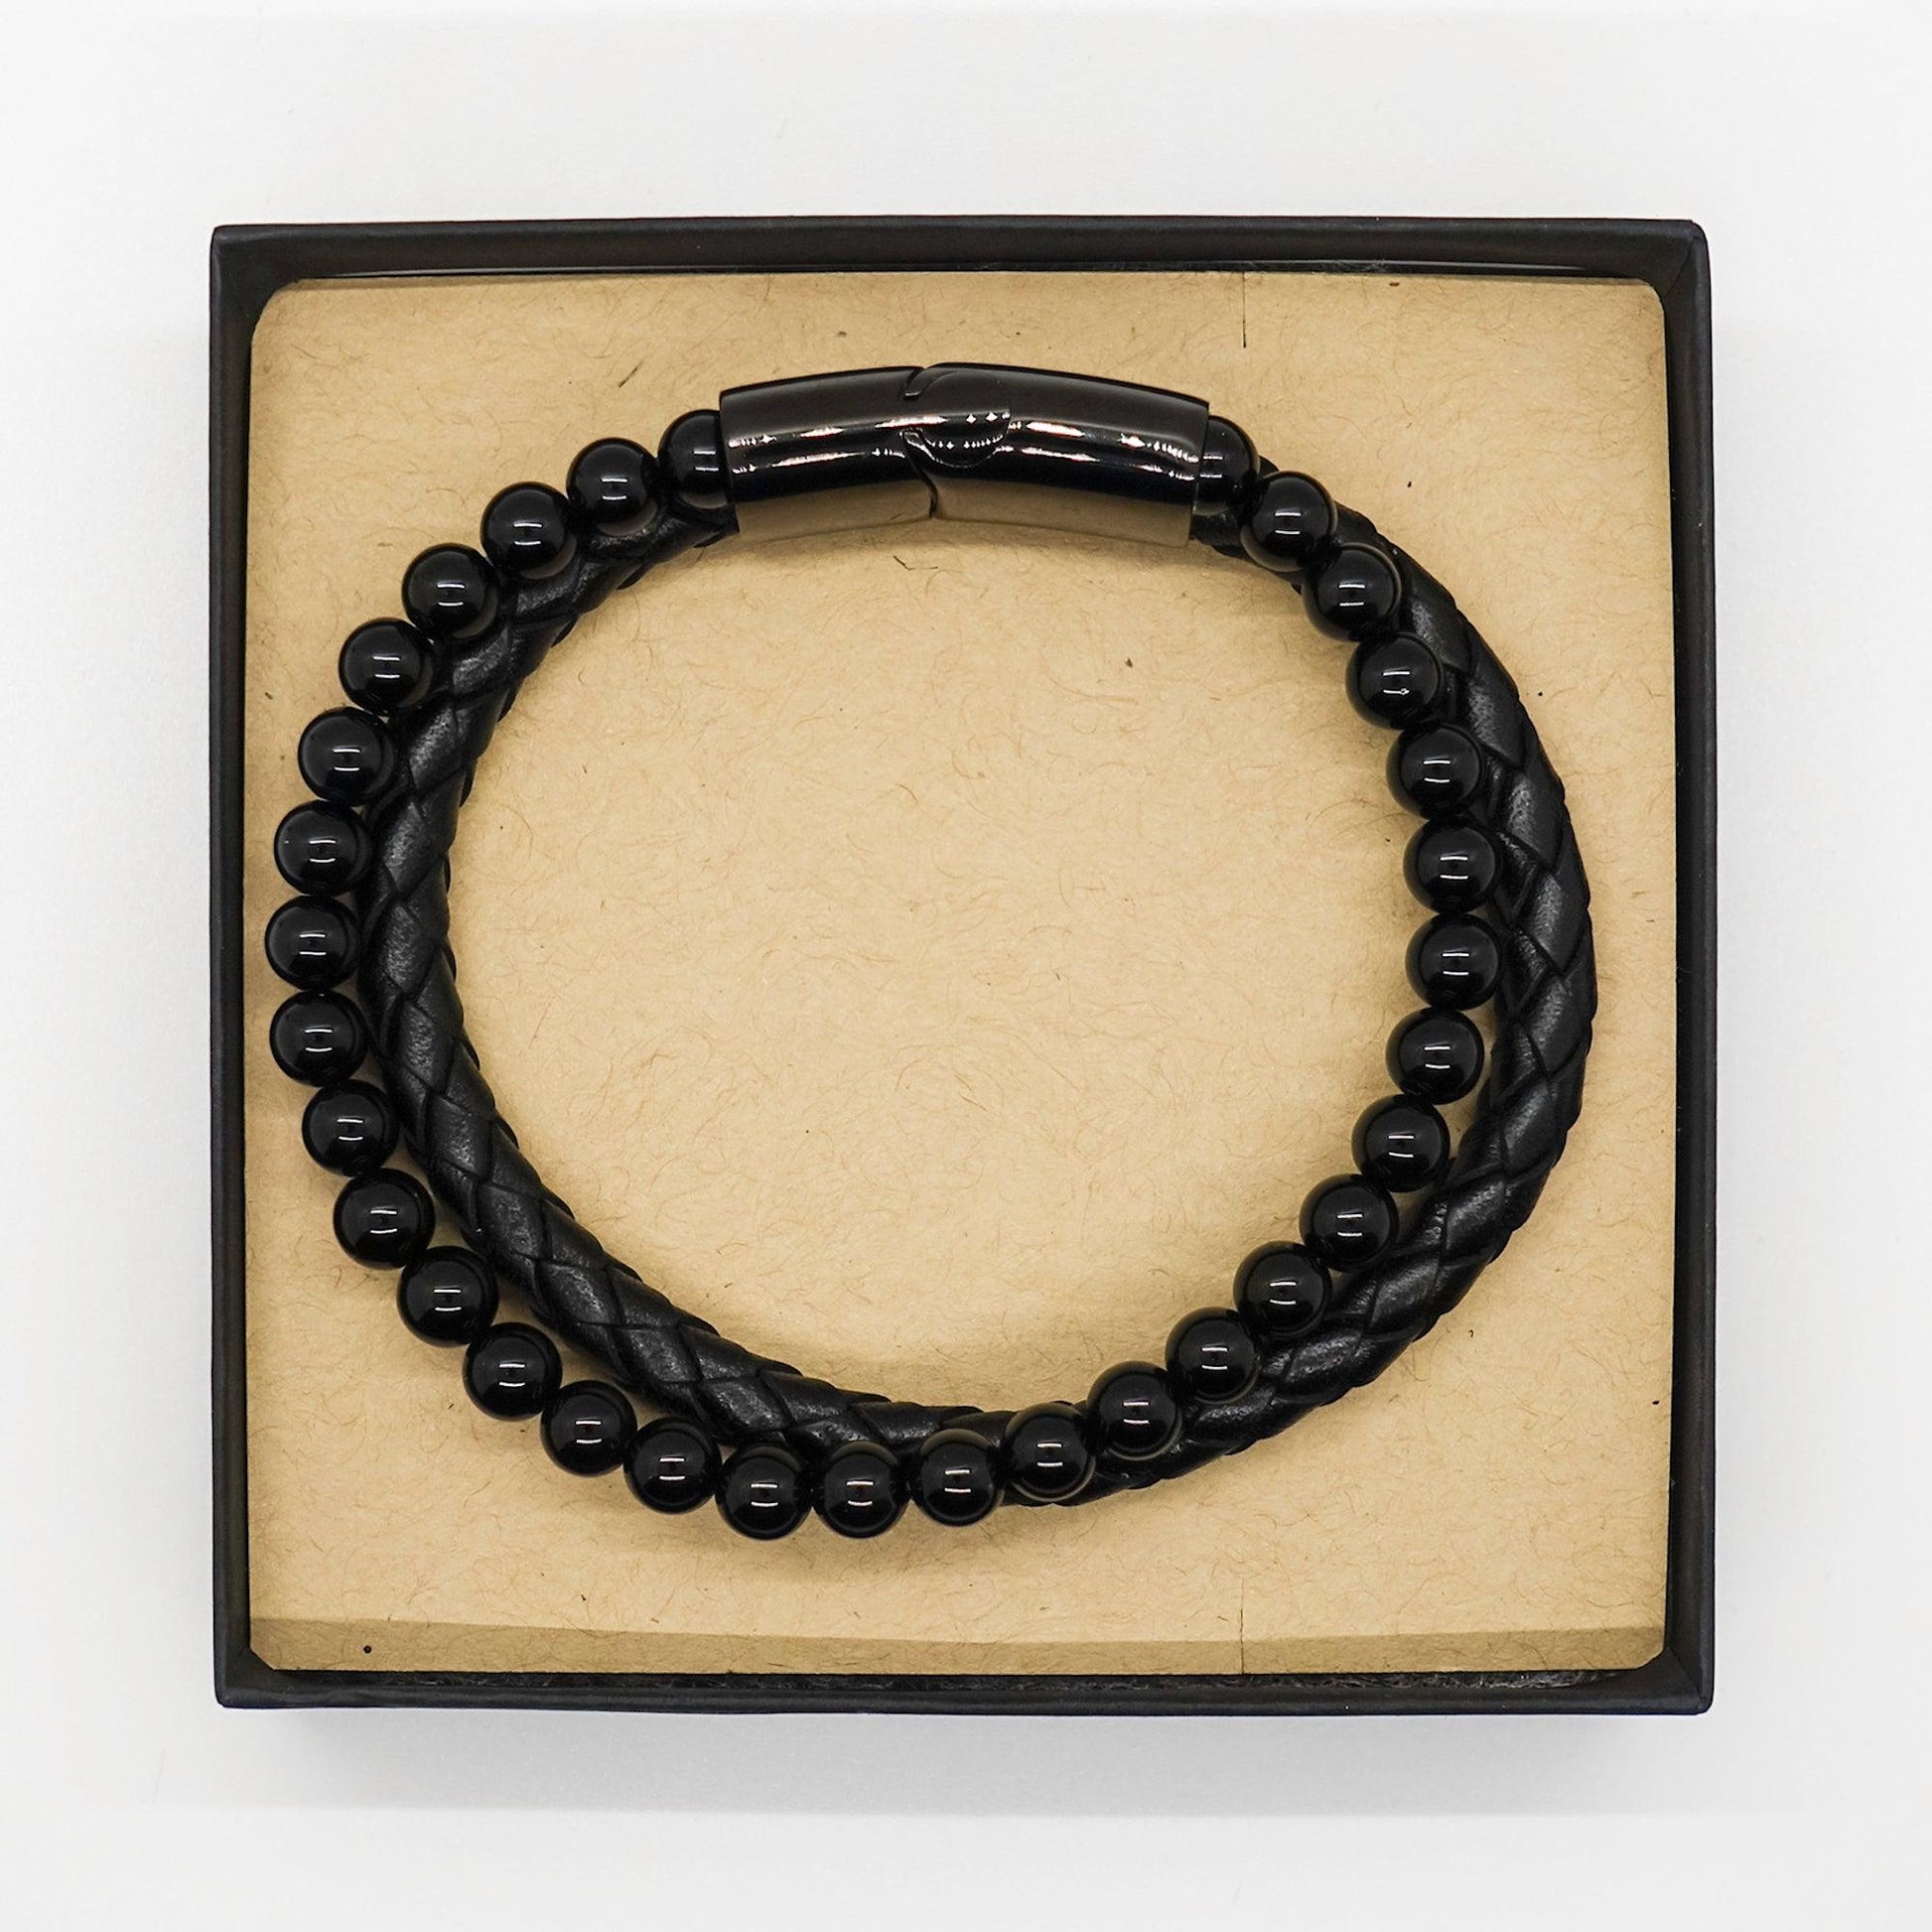 Bookbinder Black Braided Stone Leather Bracelet - Thanks for being who you are - Birthday Christmas Jewelry Gifts Coworkers Colleague Boss - Mallard Moon Gift Shop